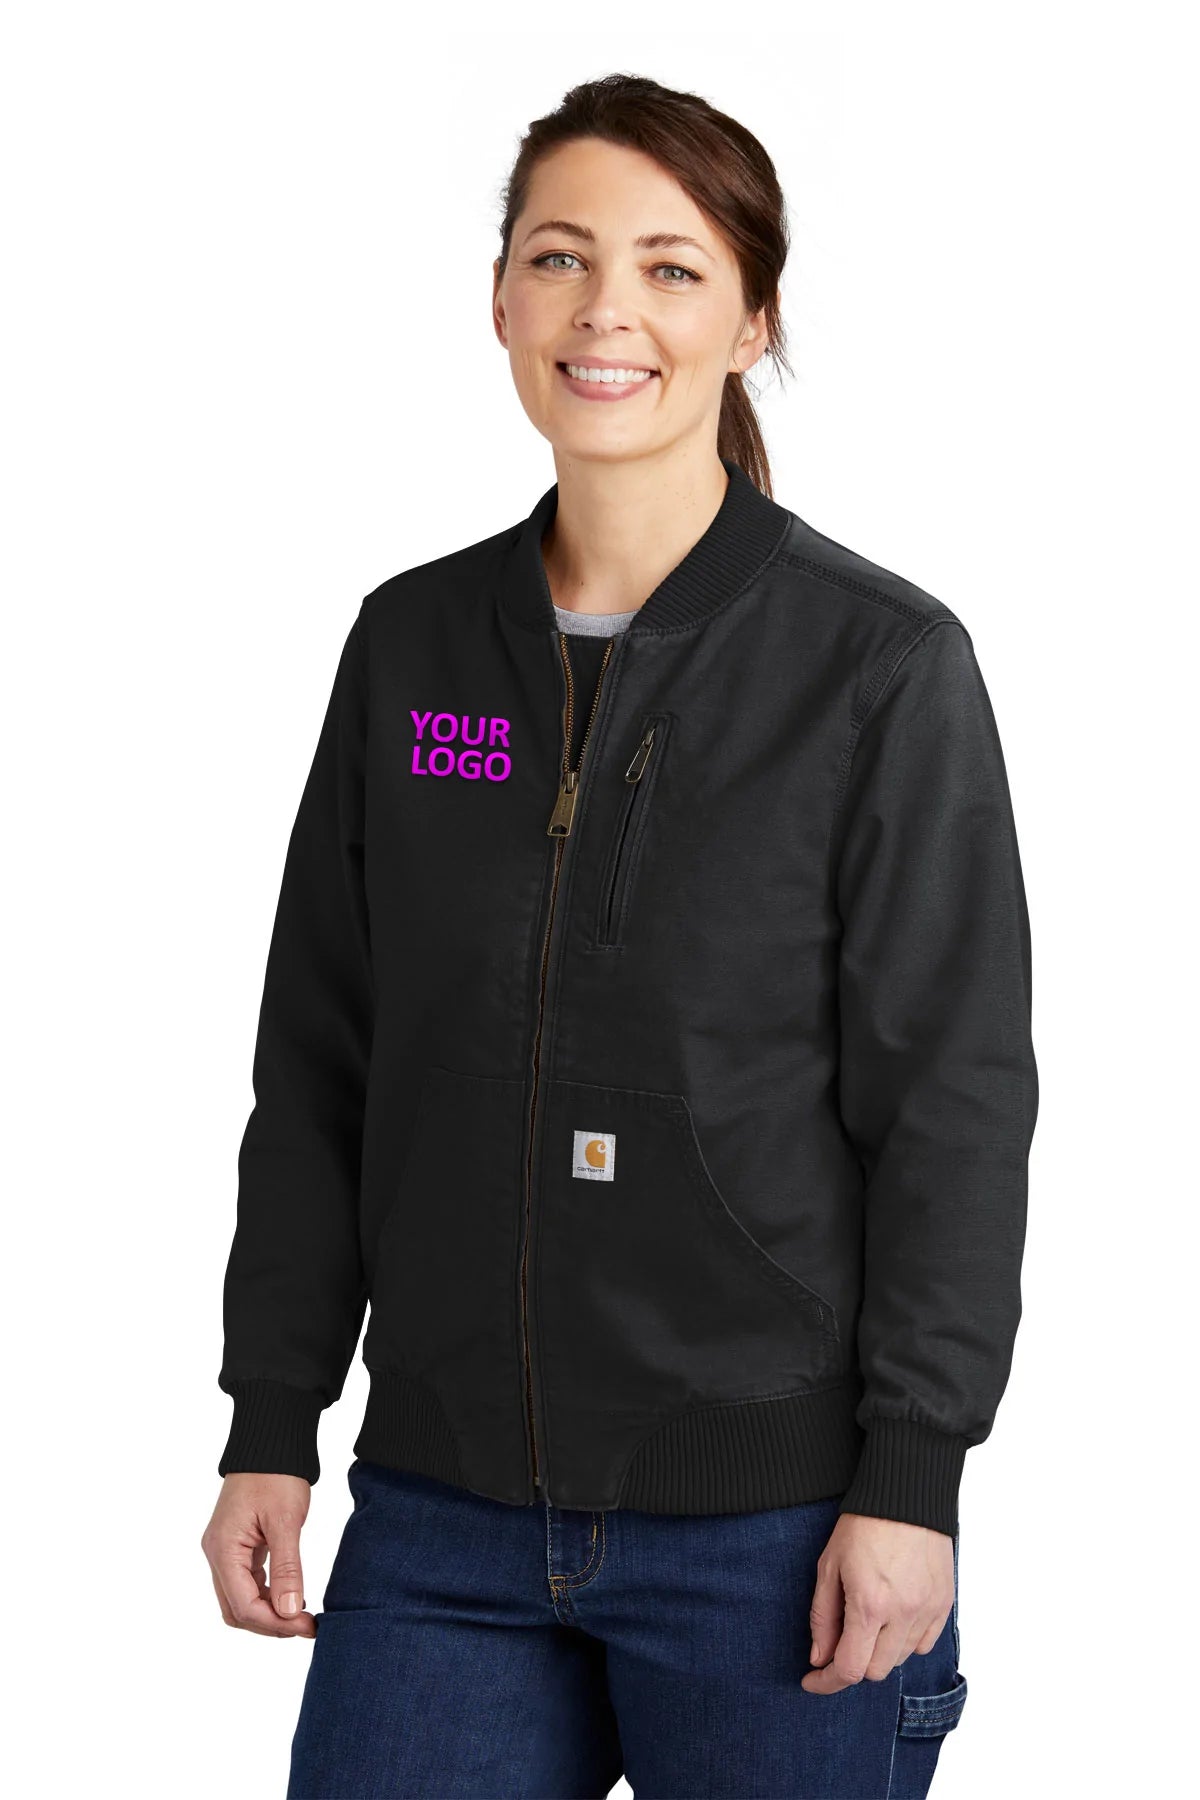 Carhartt Black CT102524 business jackets with logo